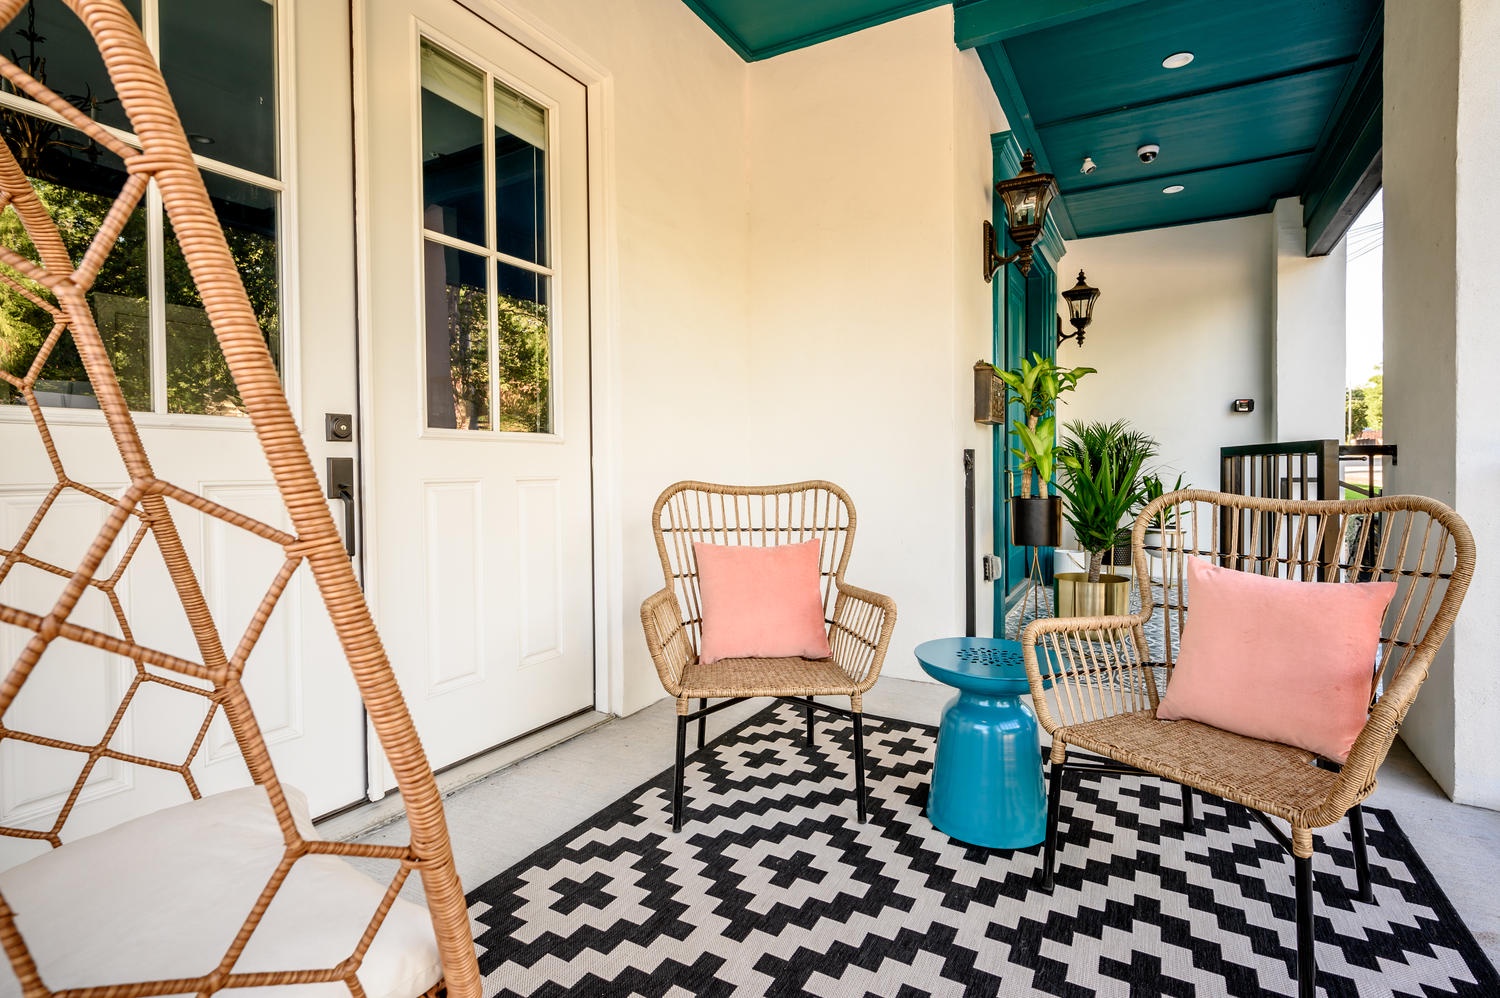 The Front Porch offers a comfortable, shady spot to enjoy morning coffee or to curl up with a book